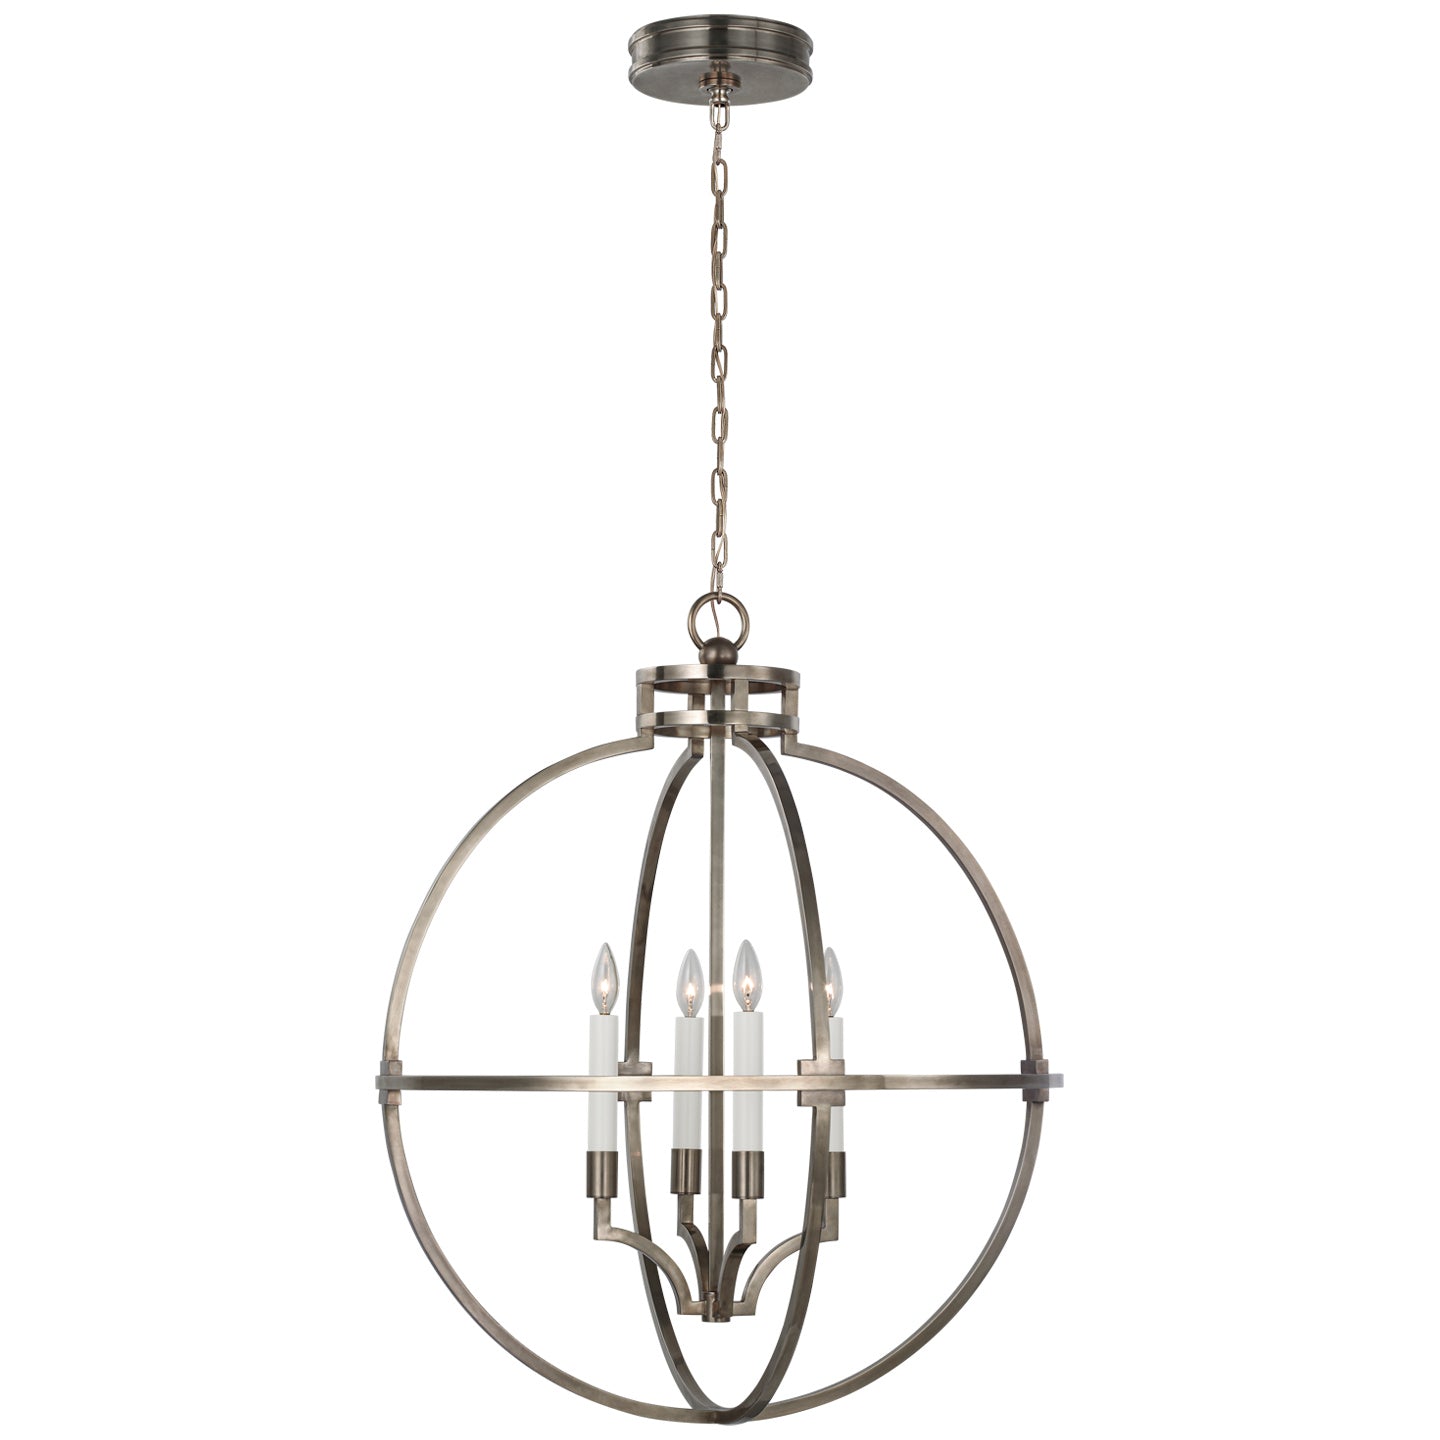 Load image into Gallery viewer, Visual Comfort Signature - CHC 5518AN - LED Lantern - Lexie - Antique Nickel
